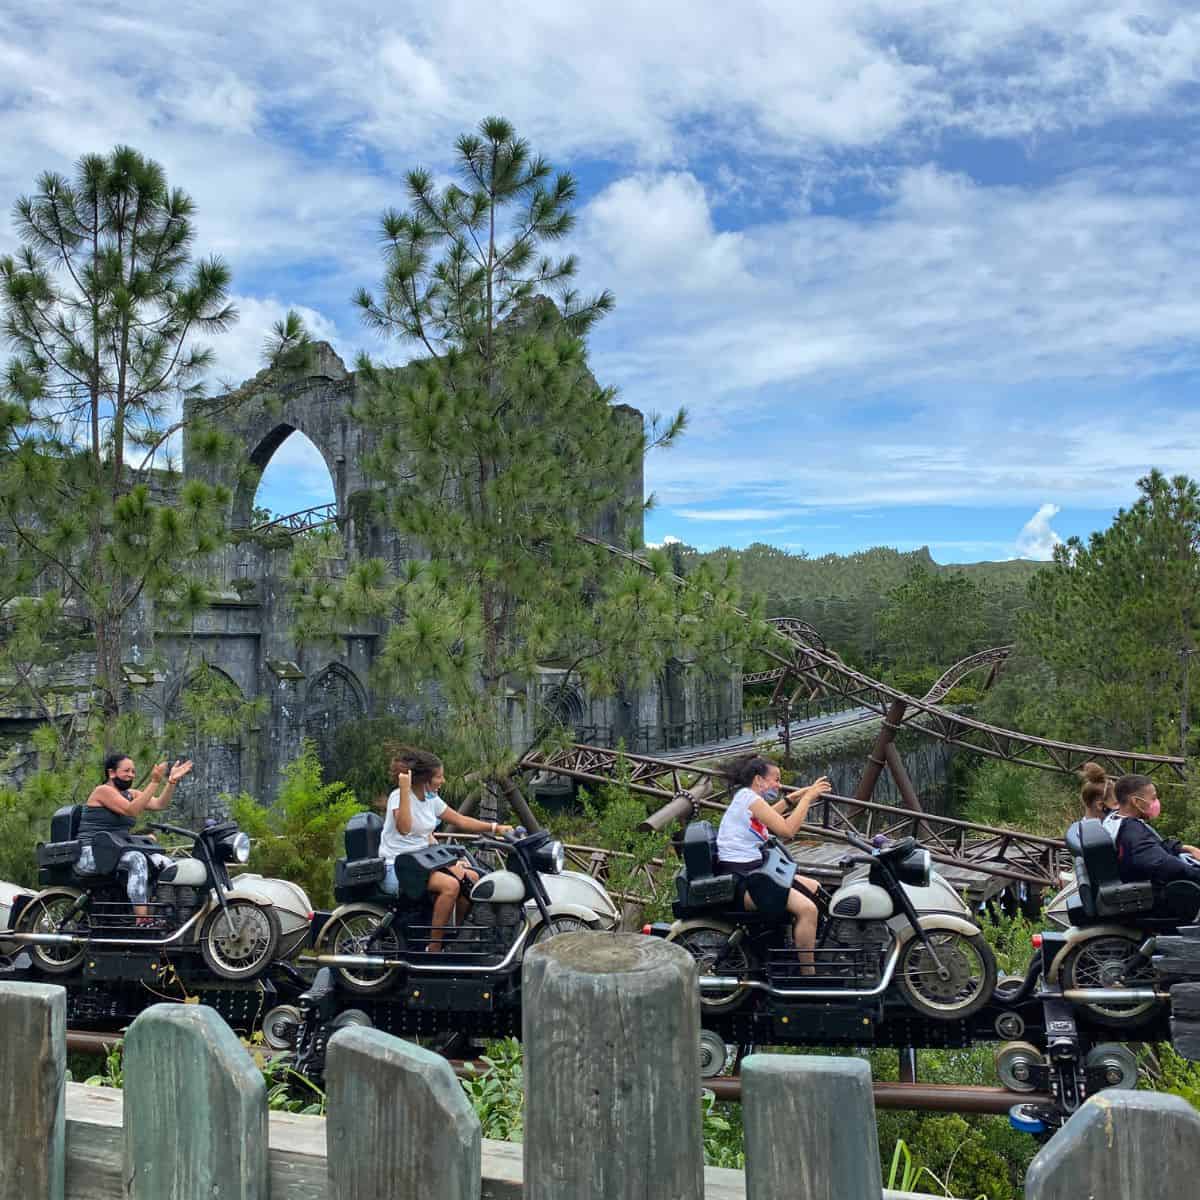 Hagrid’s Magical Creatures Motorbike Adventure ride at the Wizarding World of Harry Potter in Orlando, Florida.